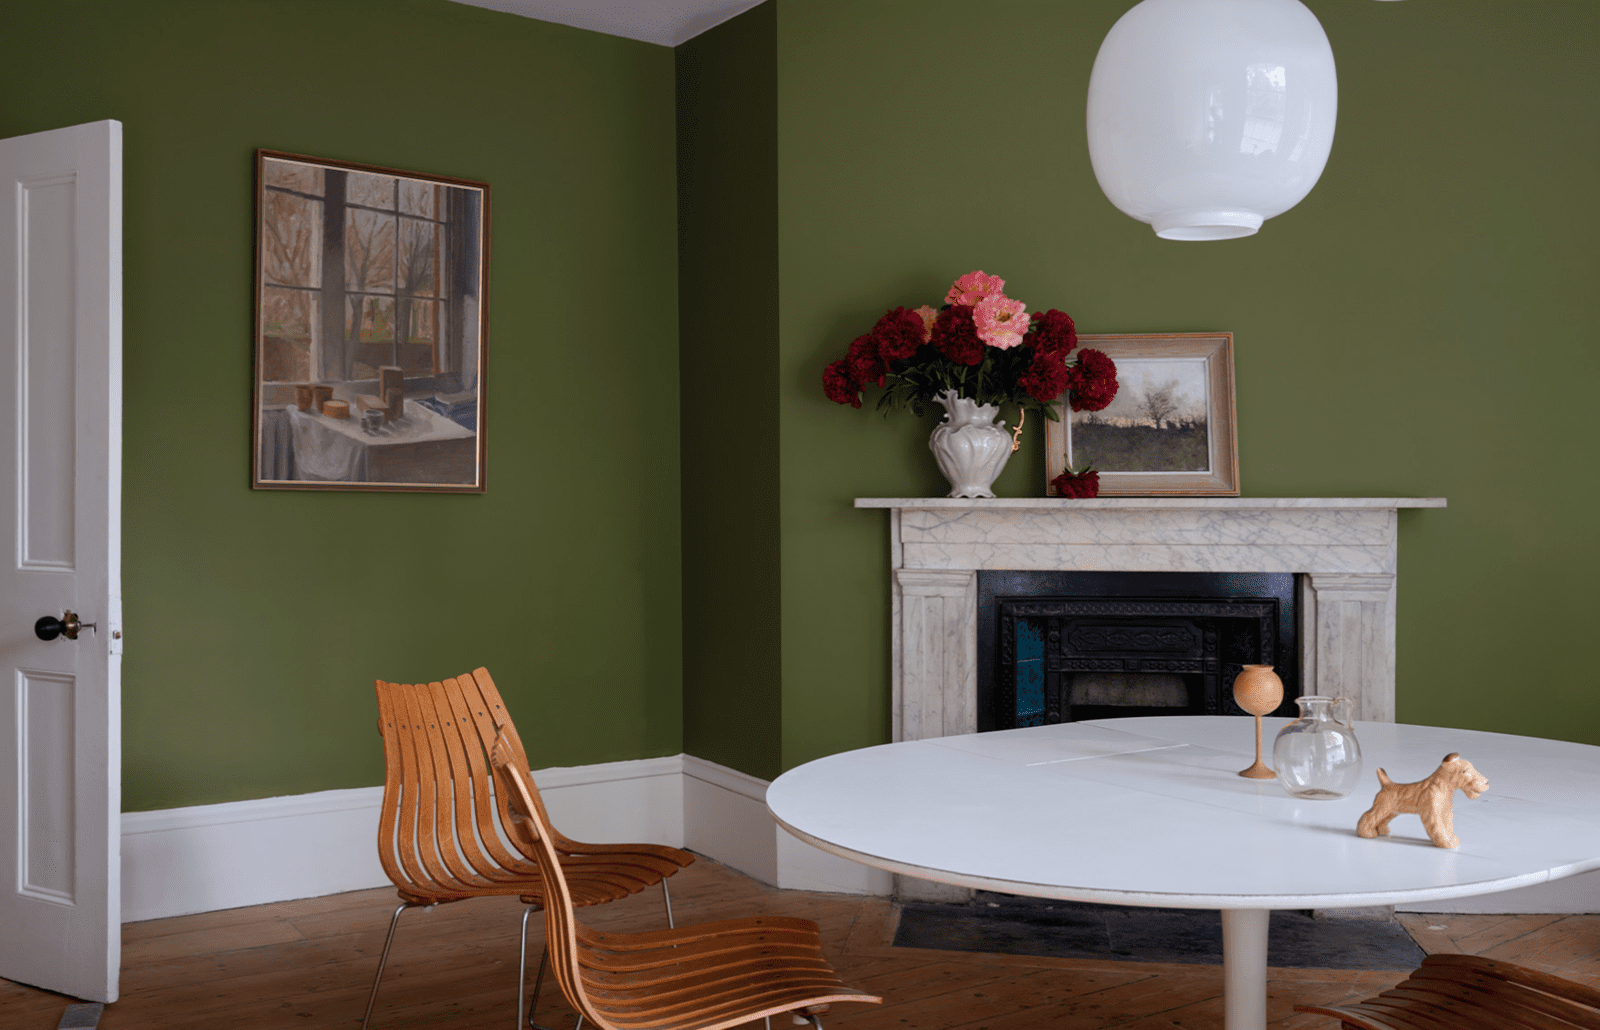 Interior house painting. Wall painted green with white trim.